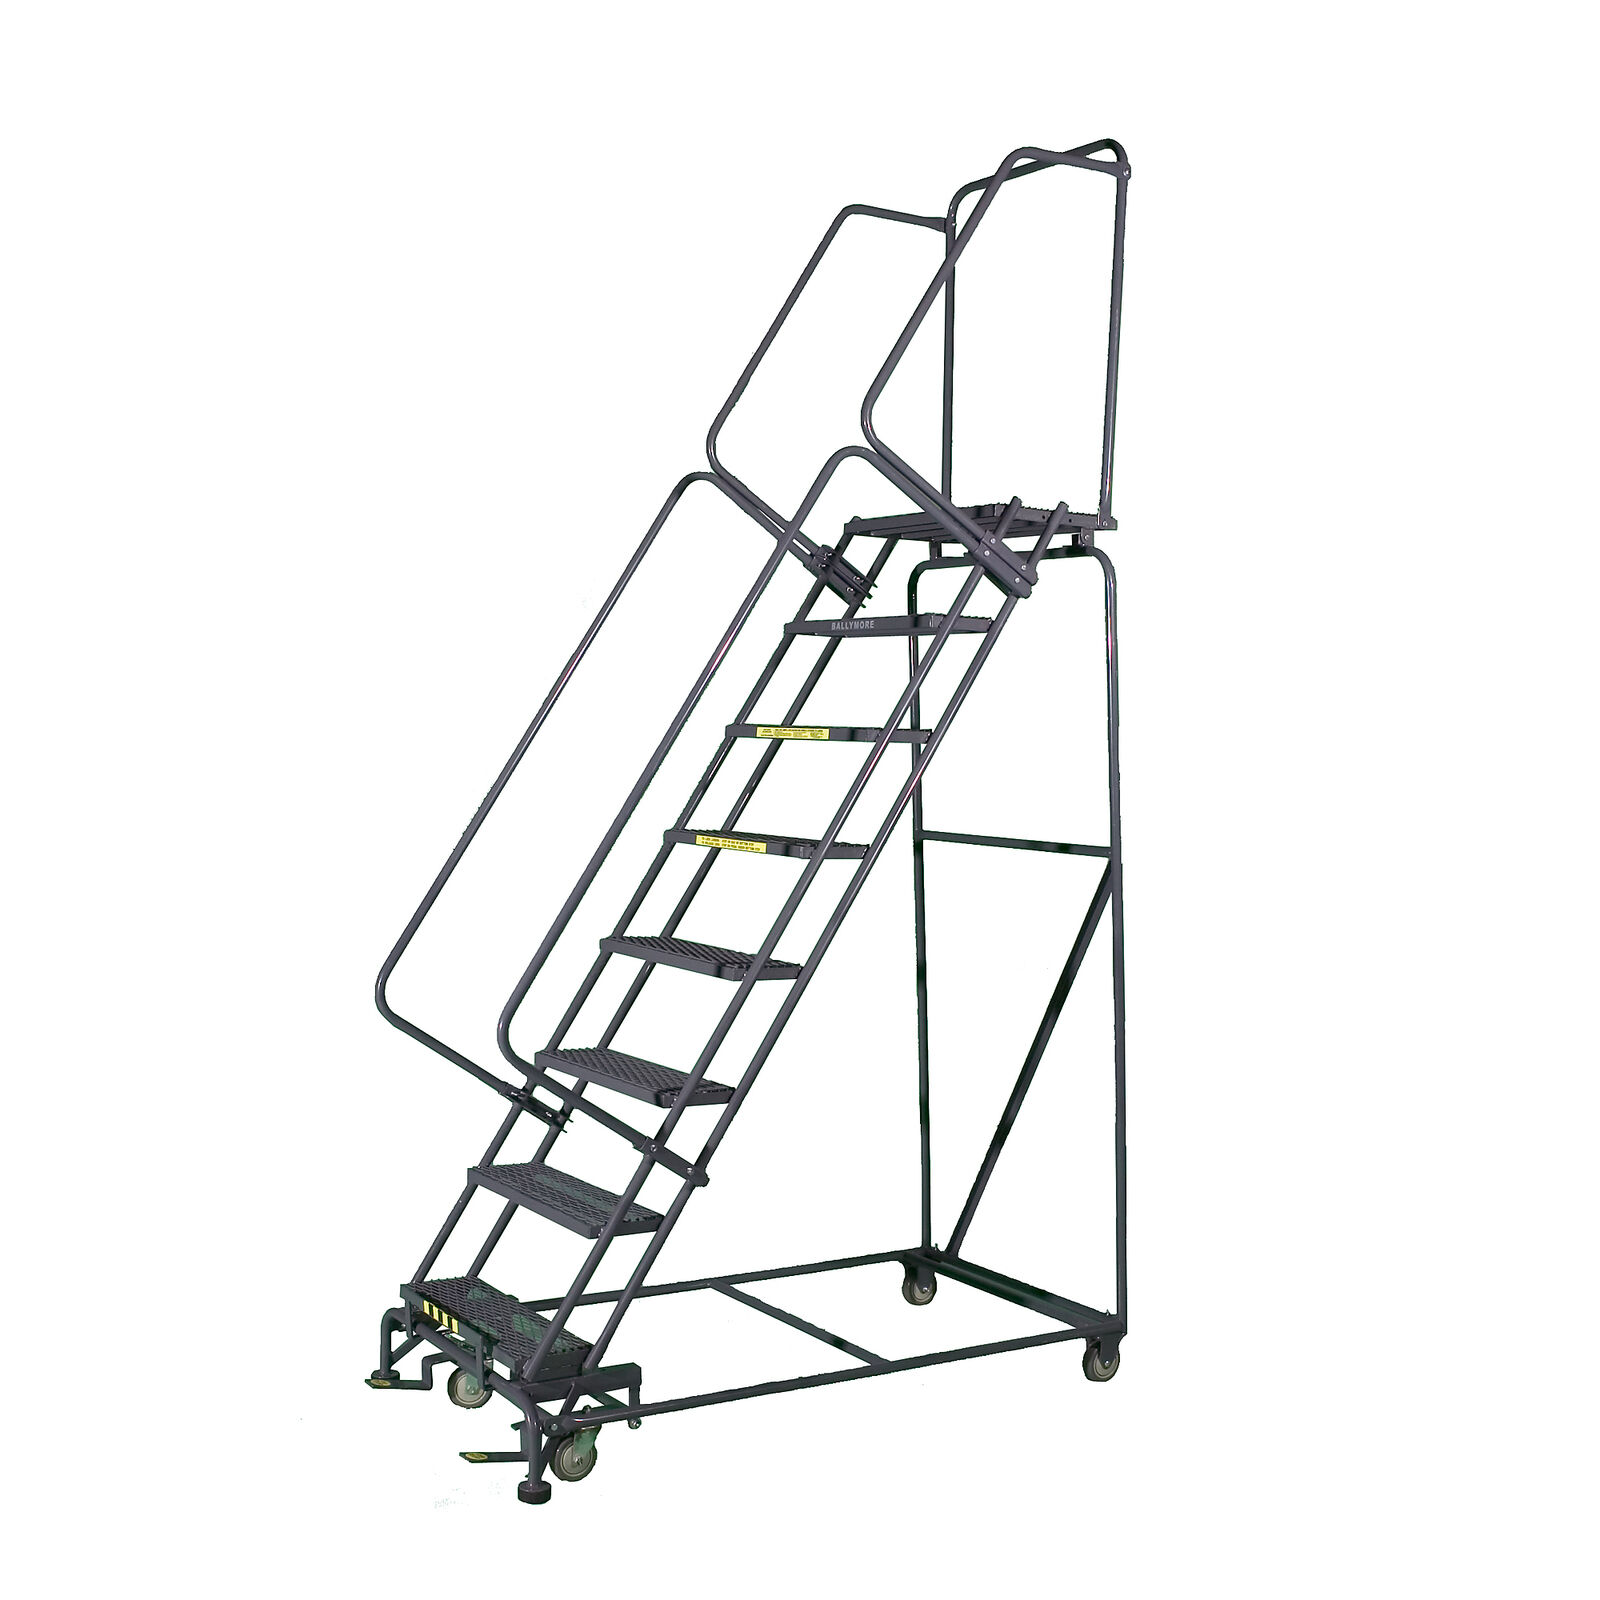 Ballymore Rolling Ladder Overall Height 113 In Steps 8 Cap 450 Lb